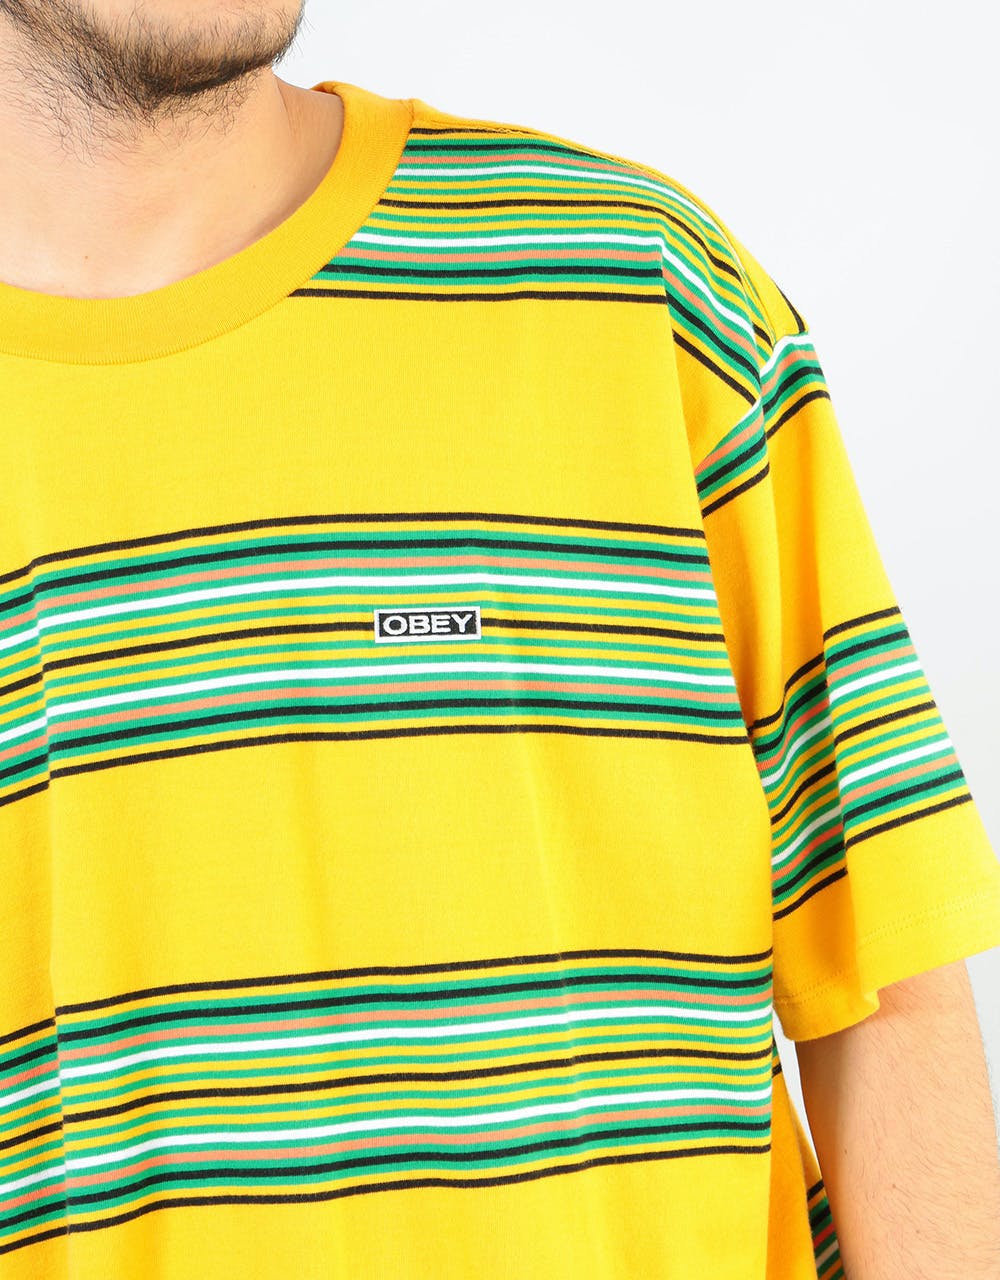 Obey Route Classic T-Shirt - Energy Yellow/Multi